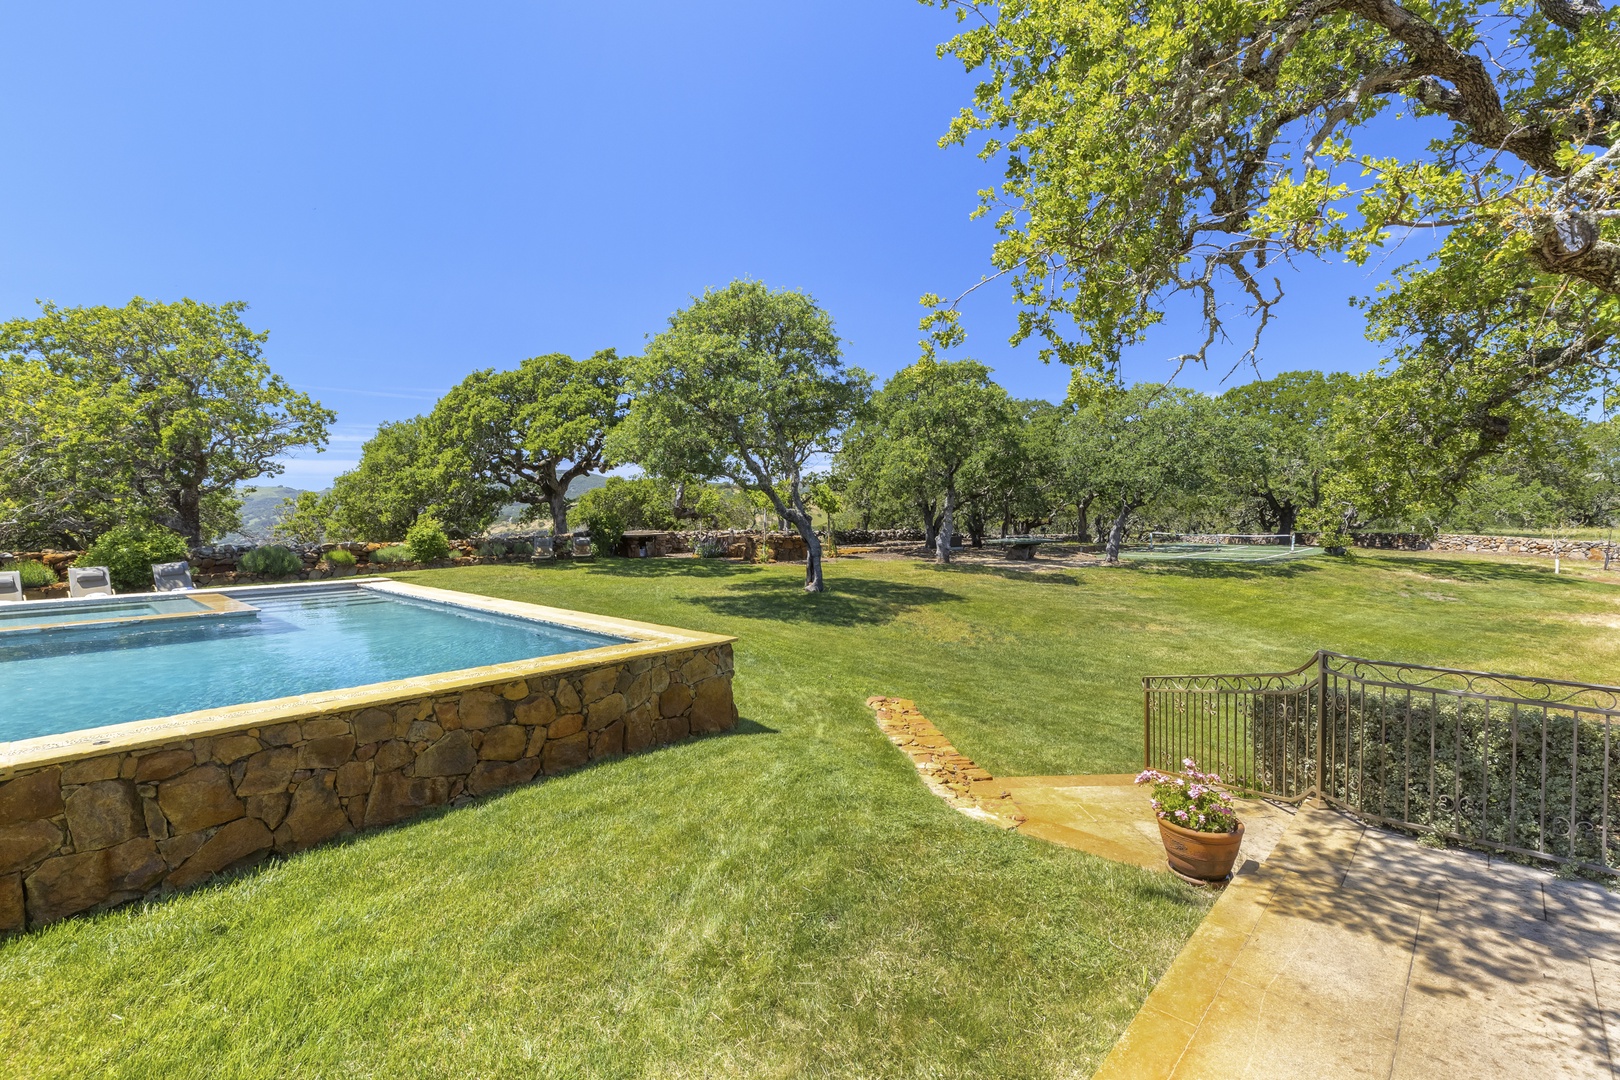 Fairfield Vacation Rentals, Villa Capricho - Surrounding the pool and jacuzzi is a pickle ball court, a bocce ball court, a large outdoor shower, cricket, horseshoes, stone seating, a BBQ, and more